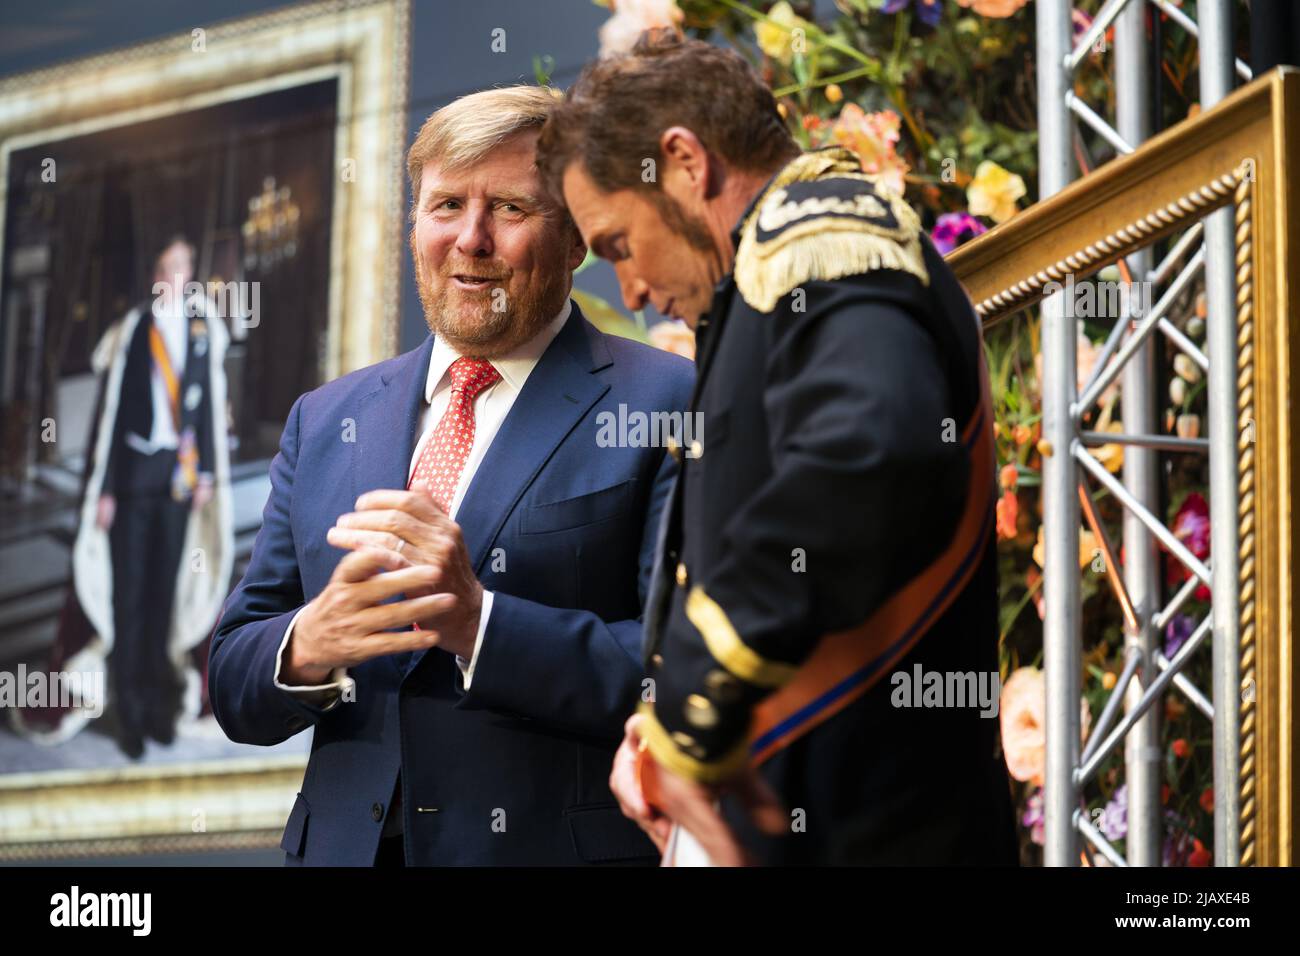 2022-06-01 16:59:02 THE HAGUE - King Willem-Alexander during the opening of the FLASH BACK exhibition in the Mauritshuis in The Hague. In the exhibition, sixteen photographers translate the work of 17th century masters into sixteen new works of art. ANP JEROEN JUMELET netherlands out - belgium out Stock Photo